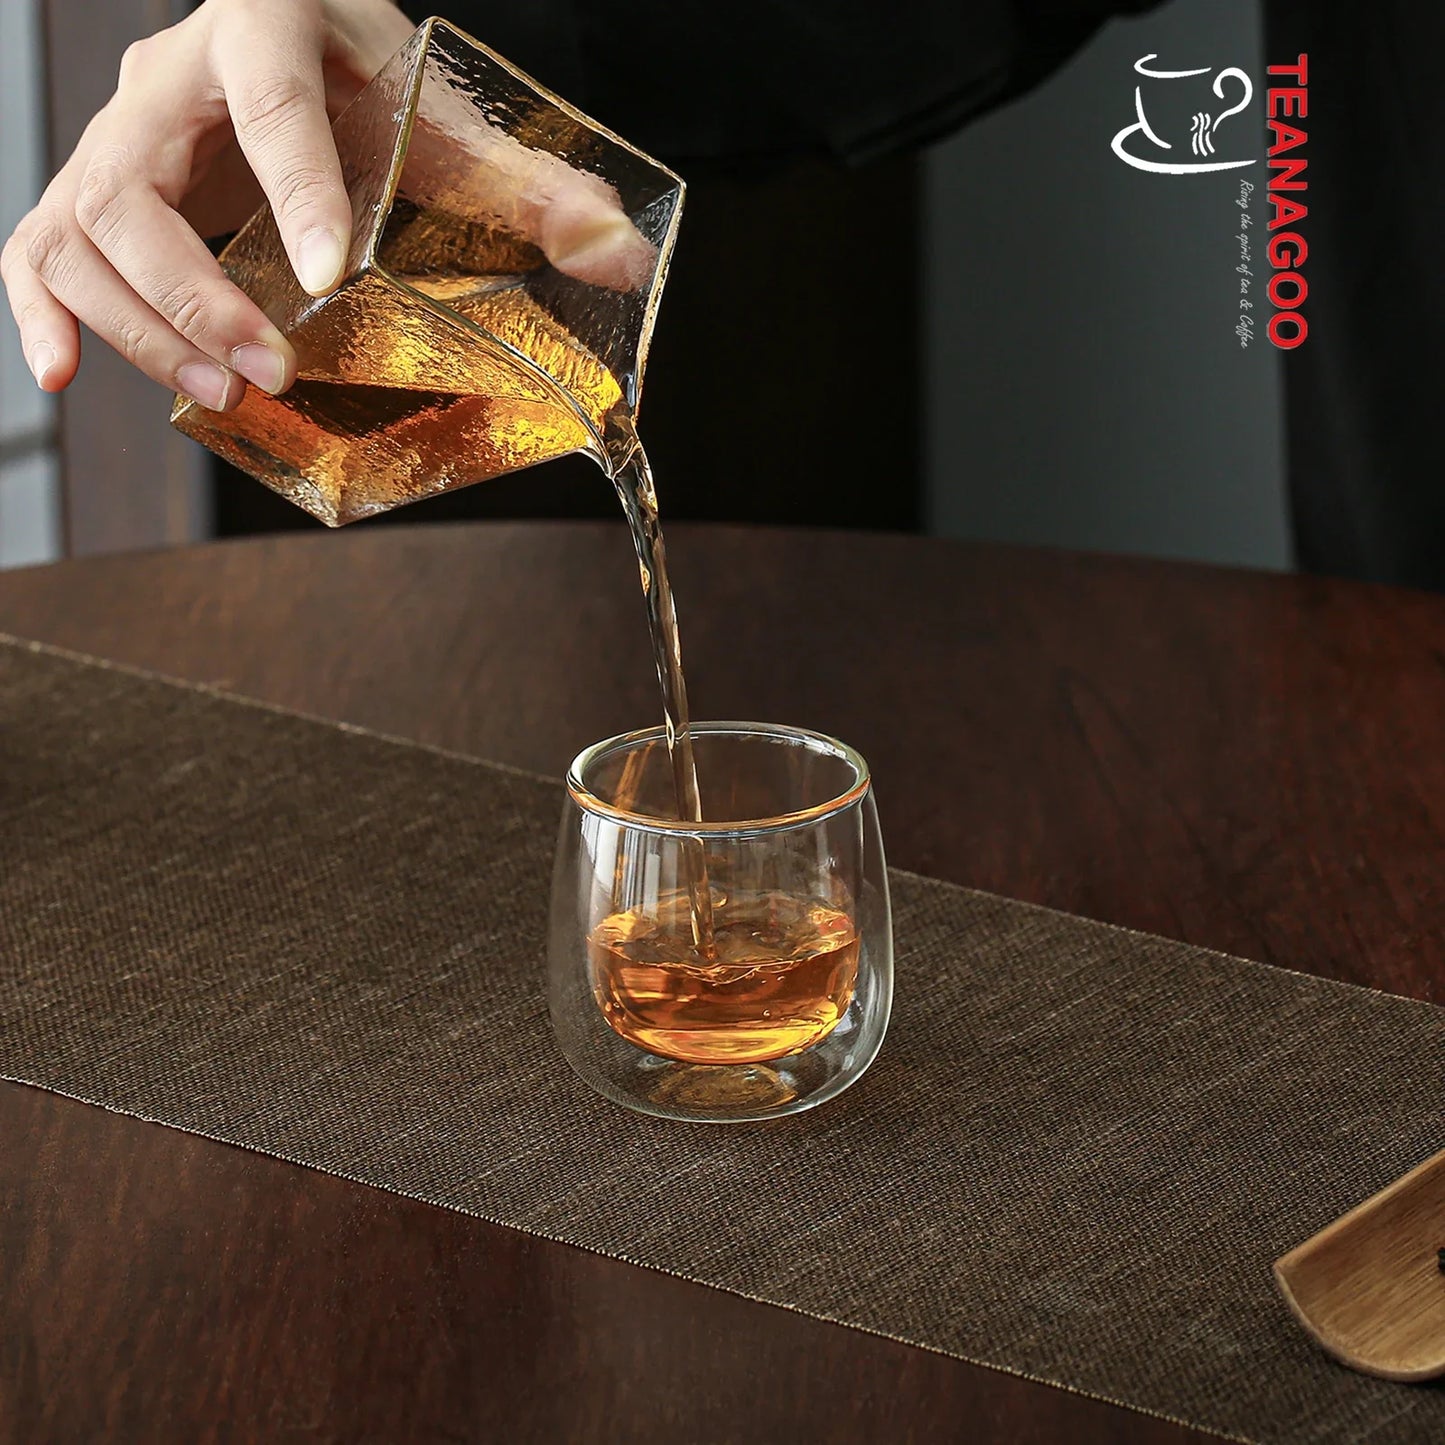 Handcrafted Double Wall Anti-scalding Glass Tea Cup